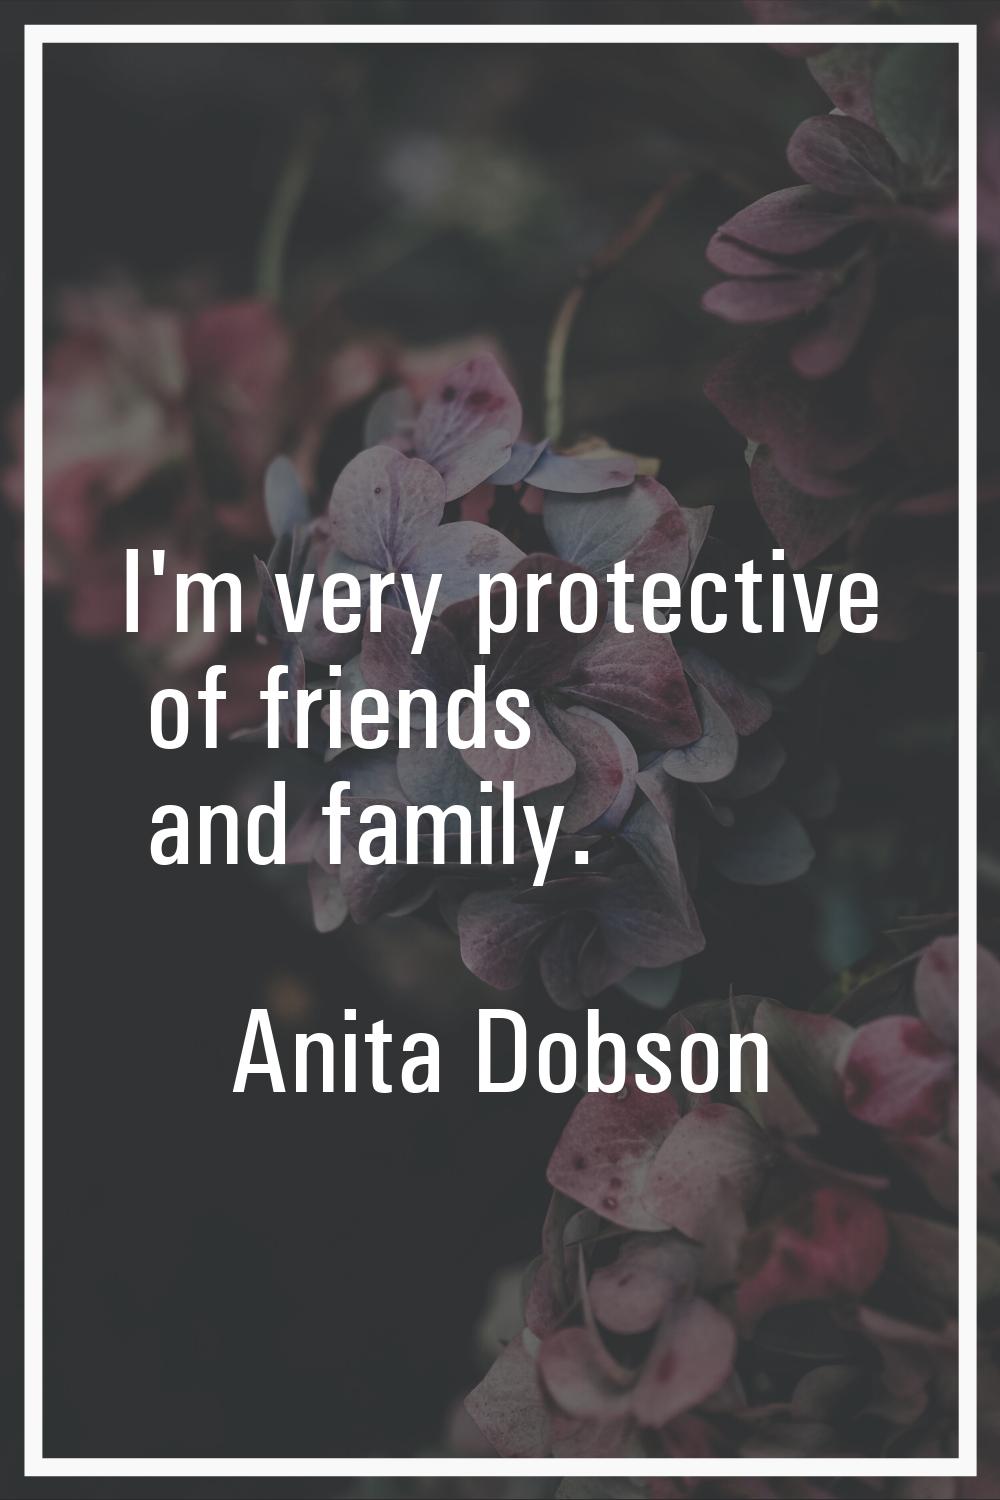 I'm very protective of friends and family.